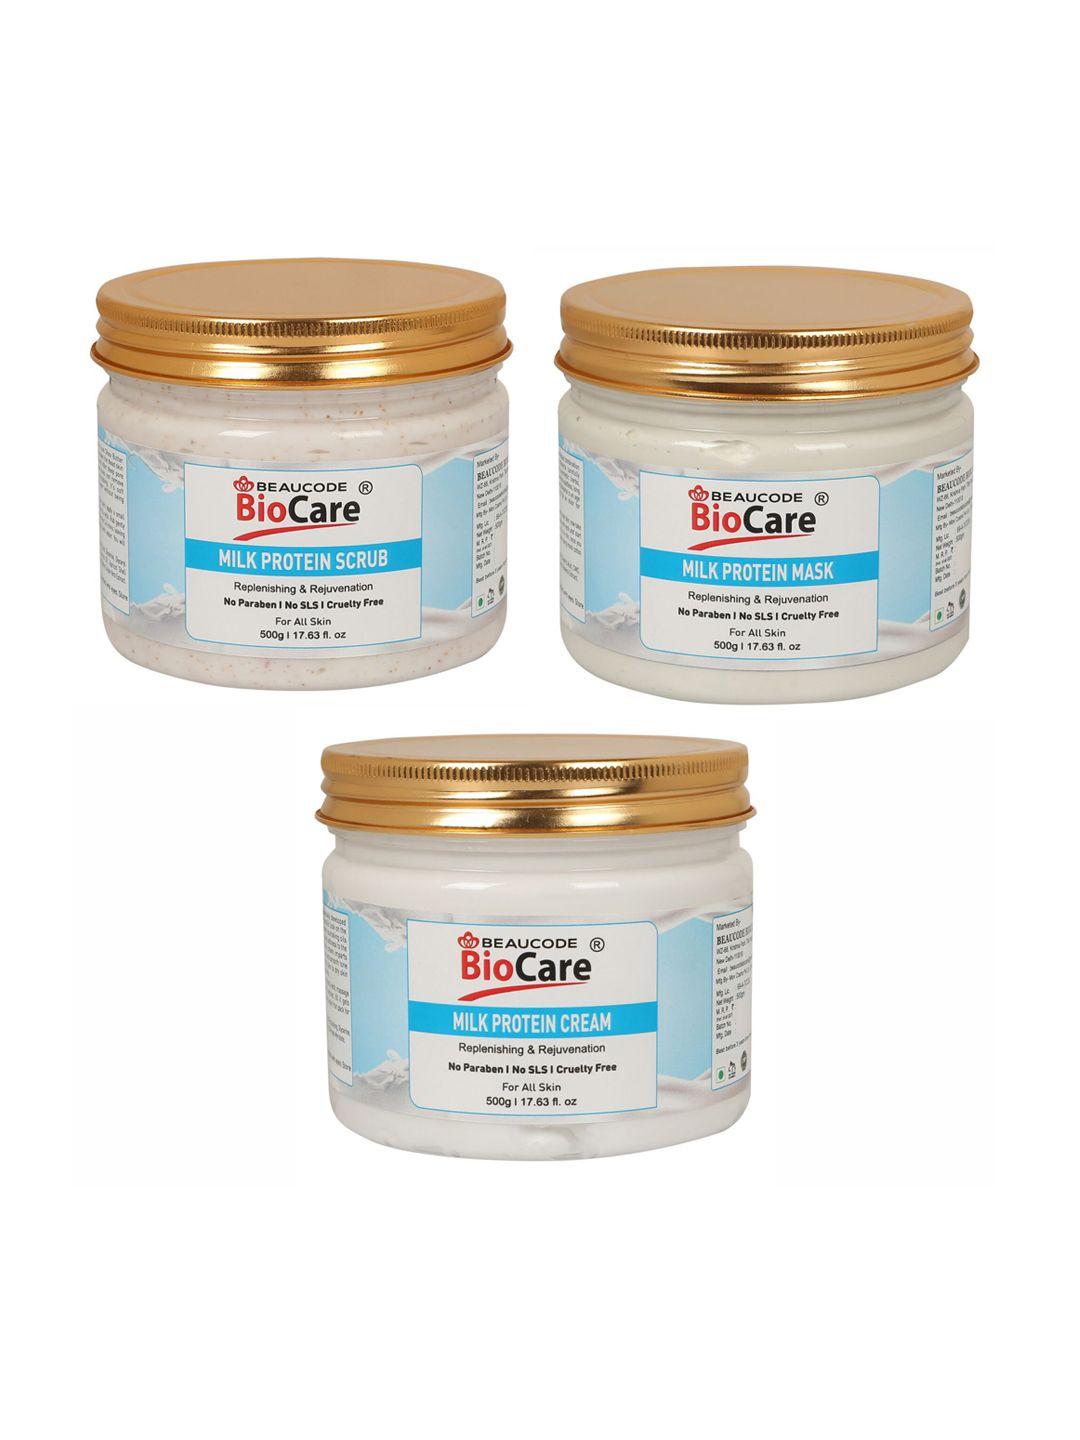 beaucode biocare milk protein facial kit for all skin types - 1500 g